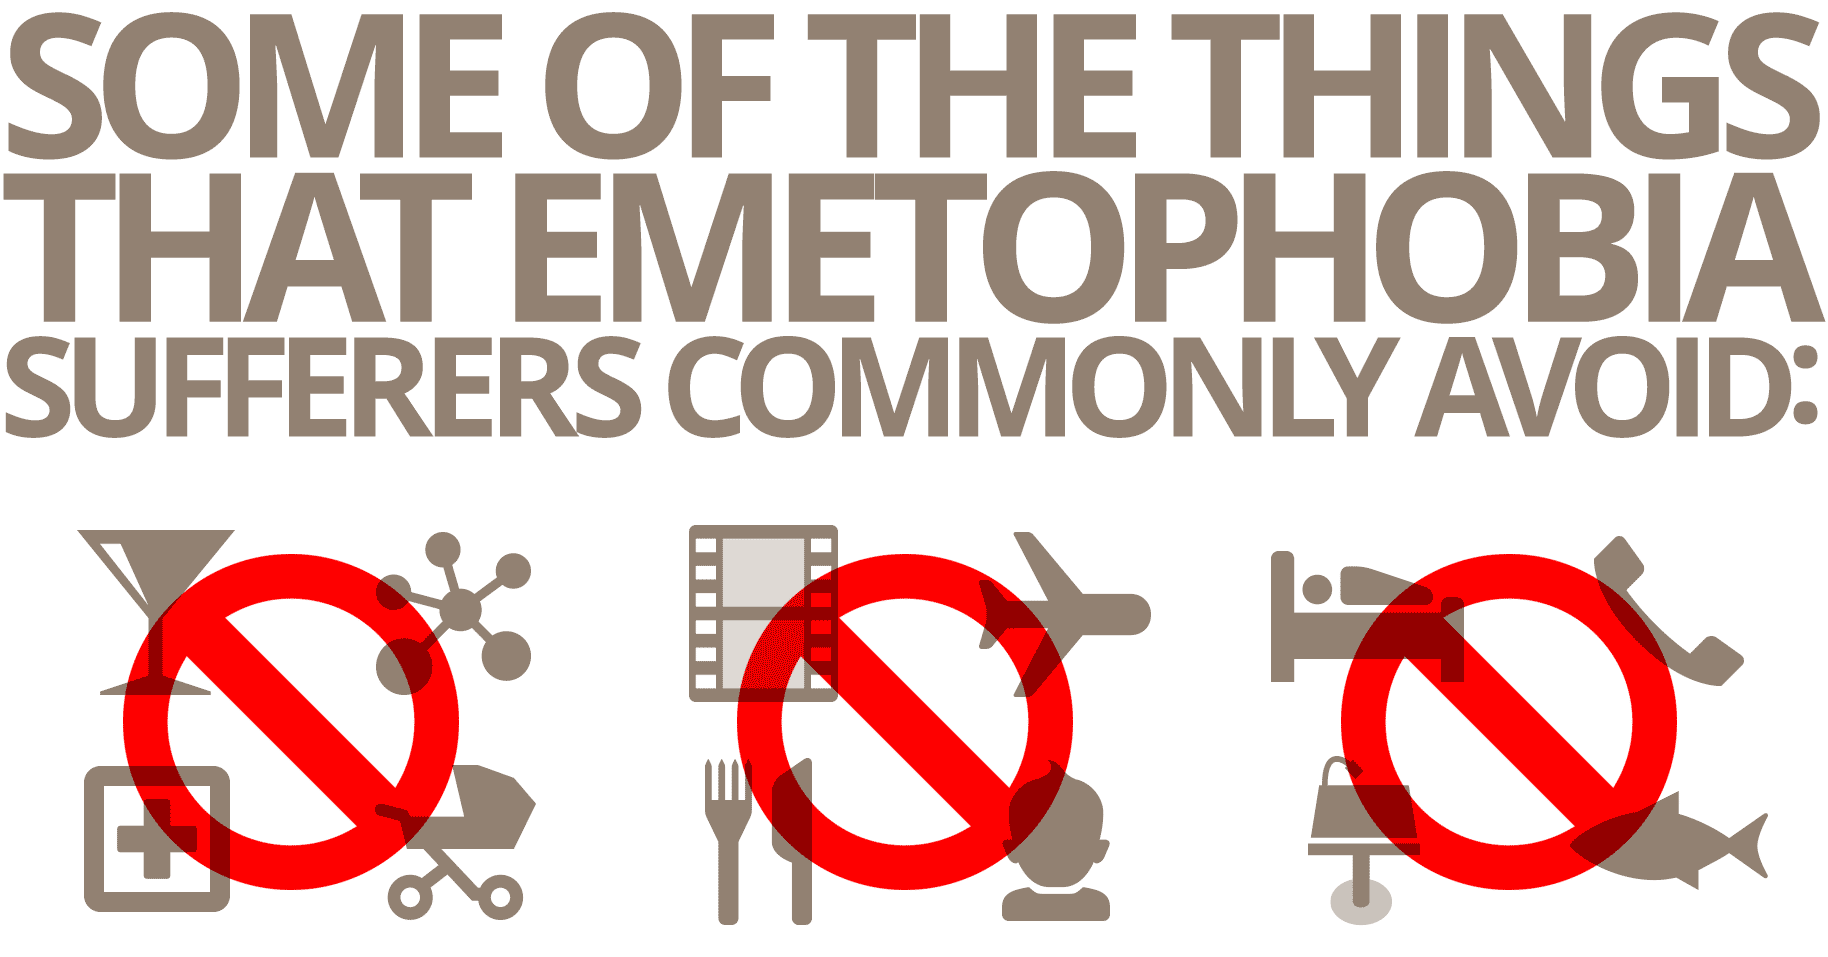 Symbols showing activities avoided by Emetophobia suffers